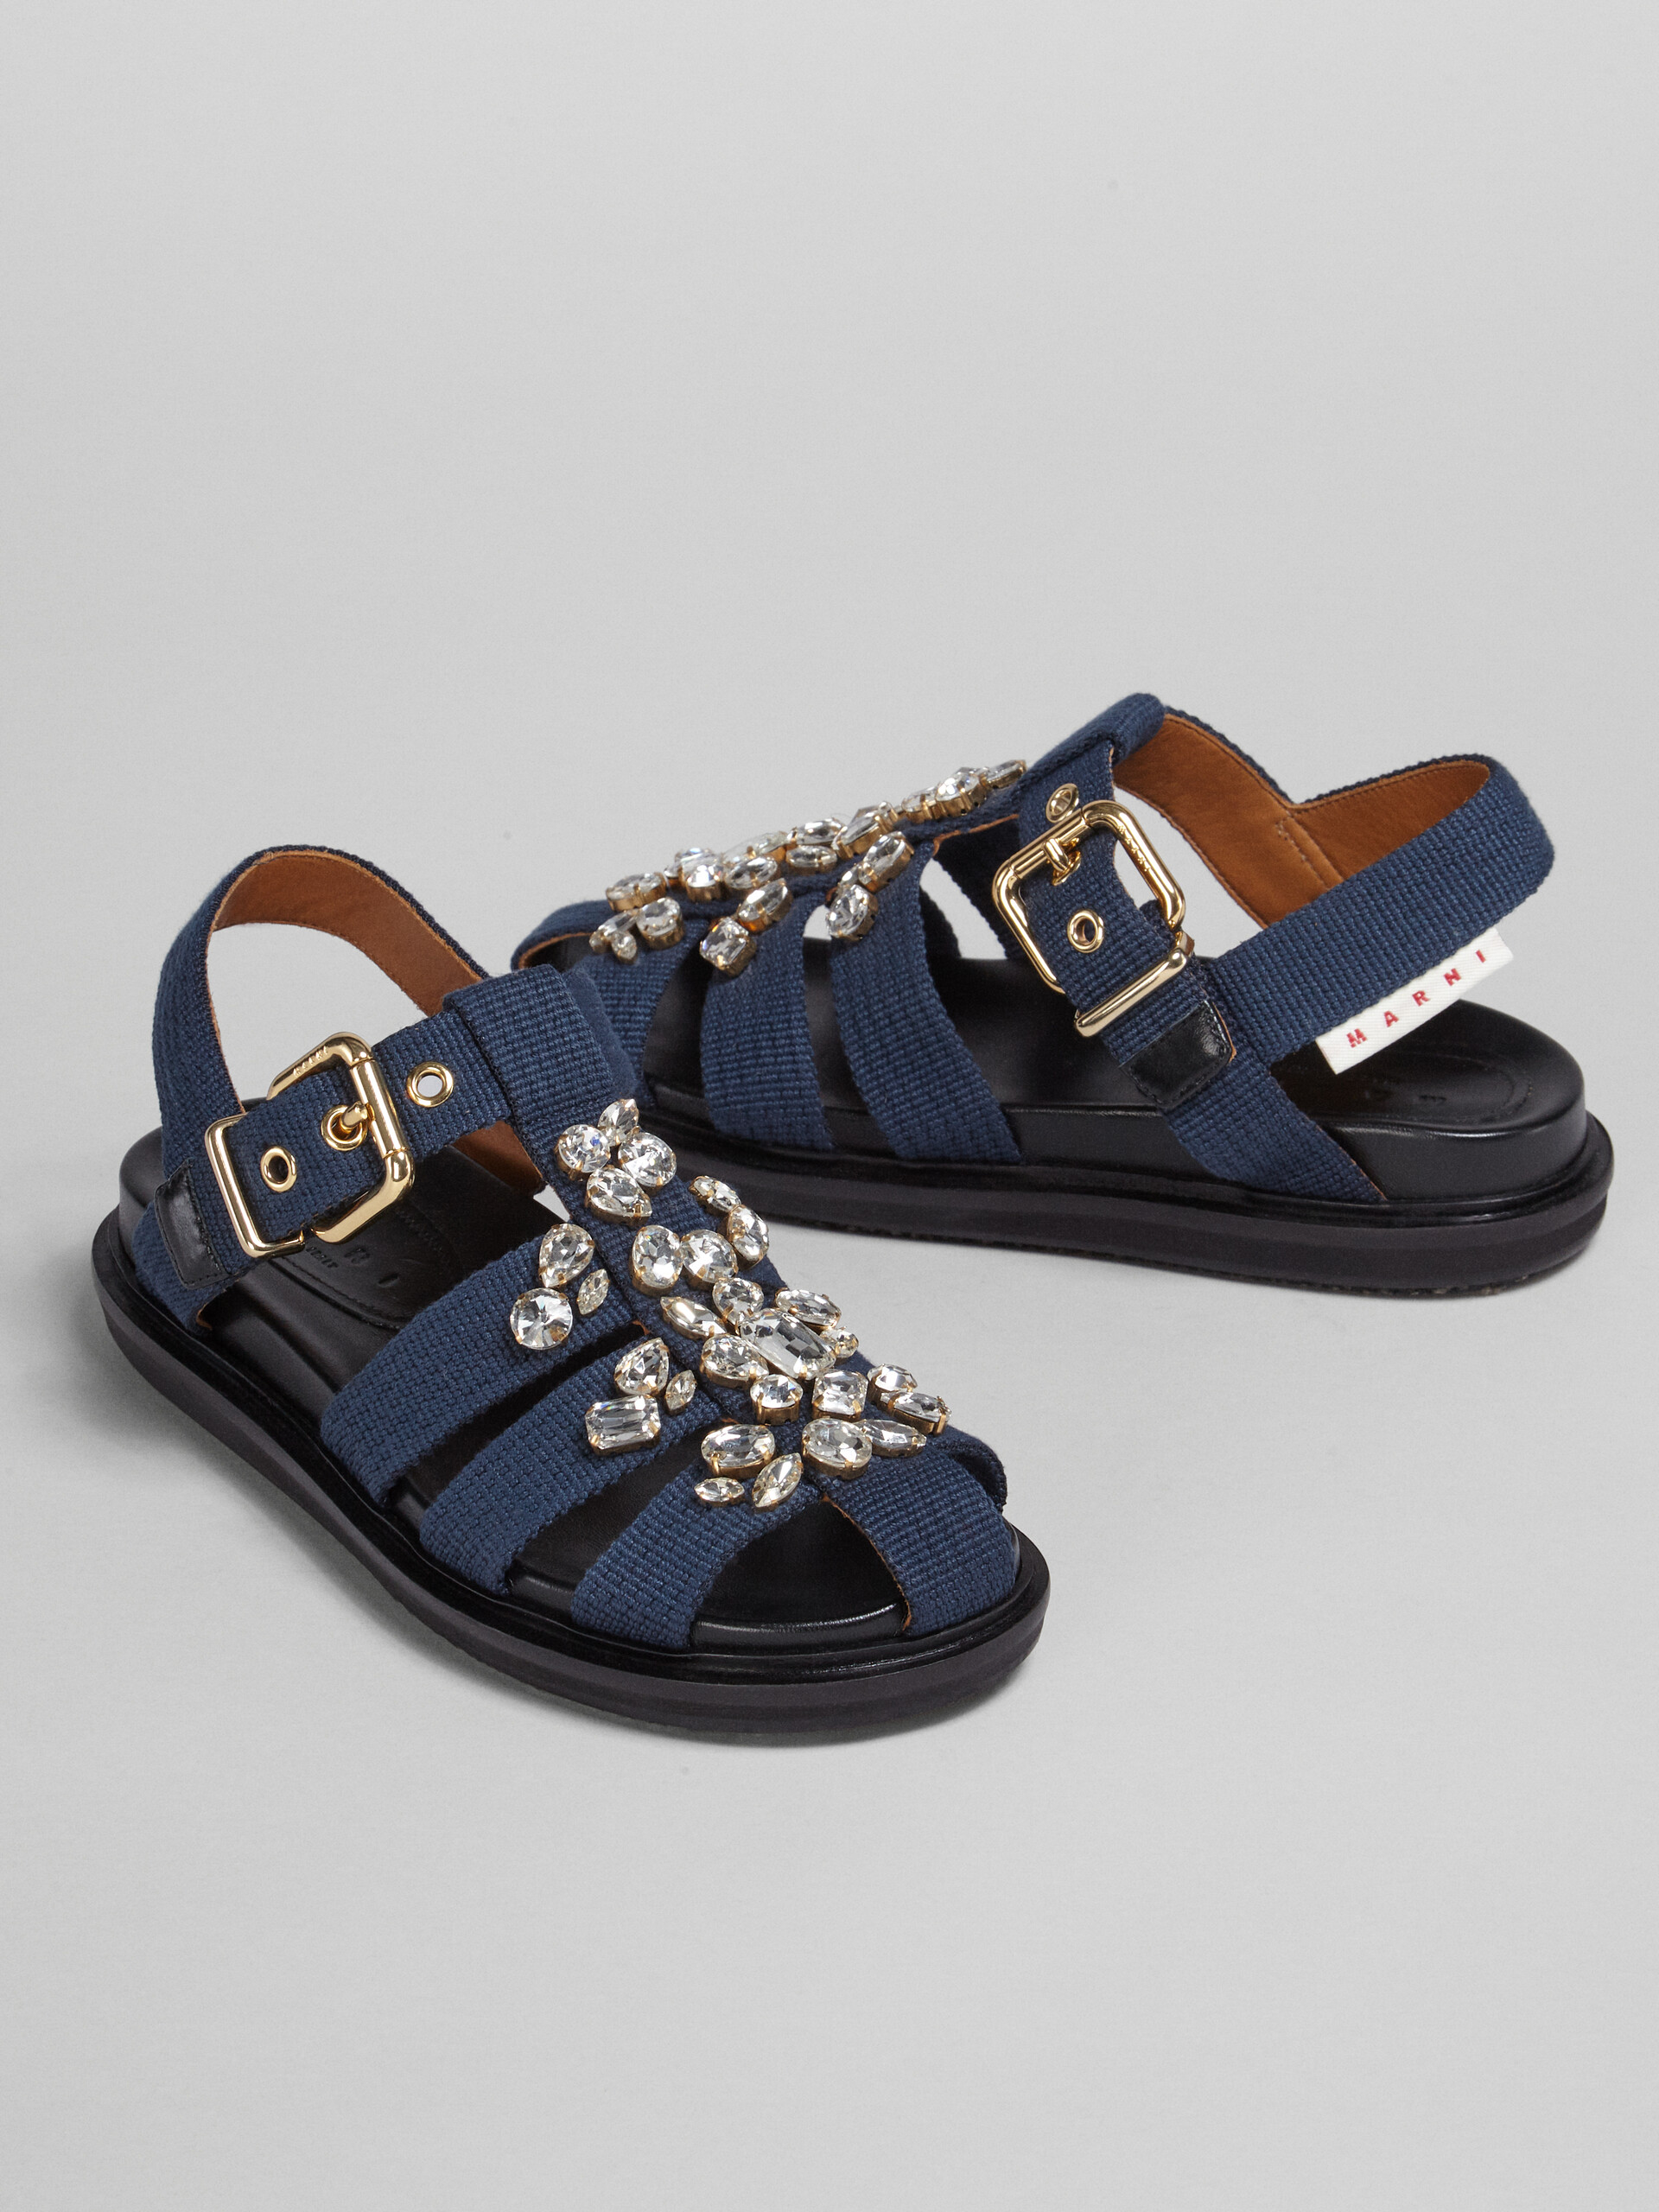 Blue ribbon Fussbett sandal with glass beads - Sandals - Image 5